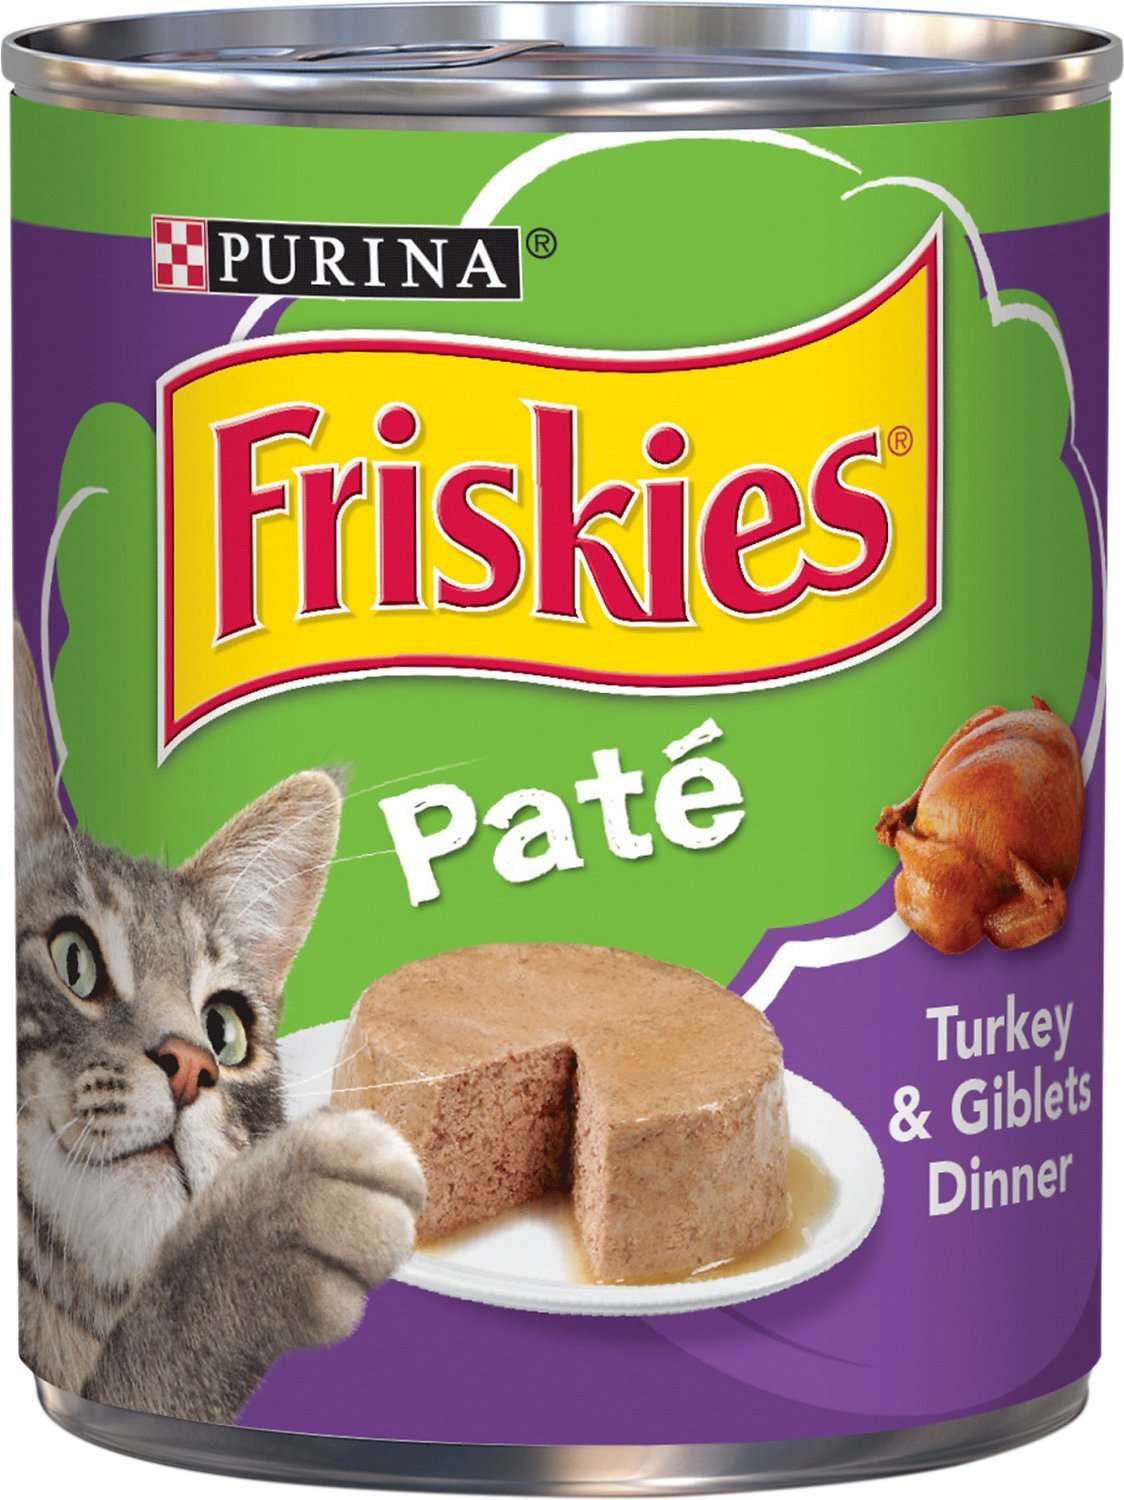 Friskies Classic Pate Turkey &  Giblets Dinner Canned Cat ...